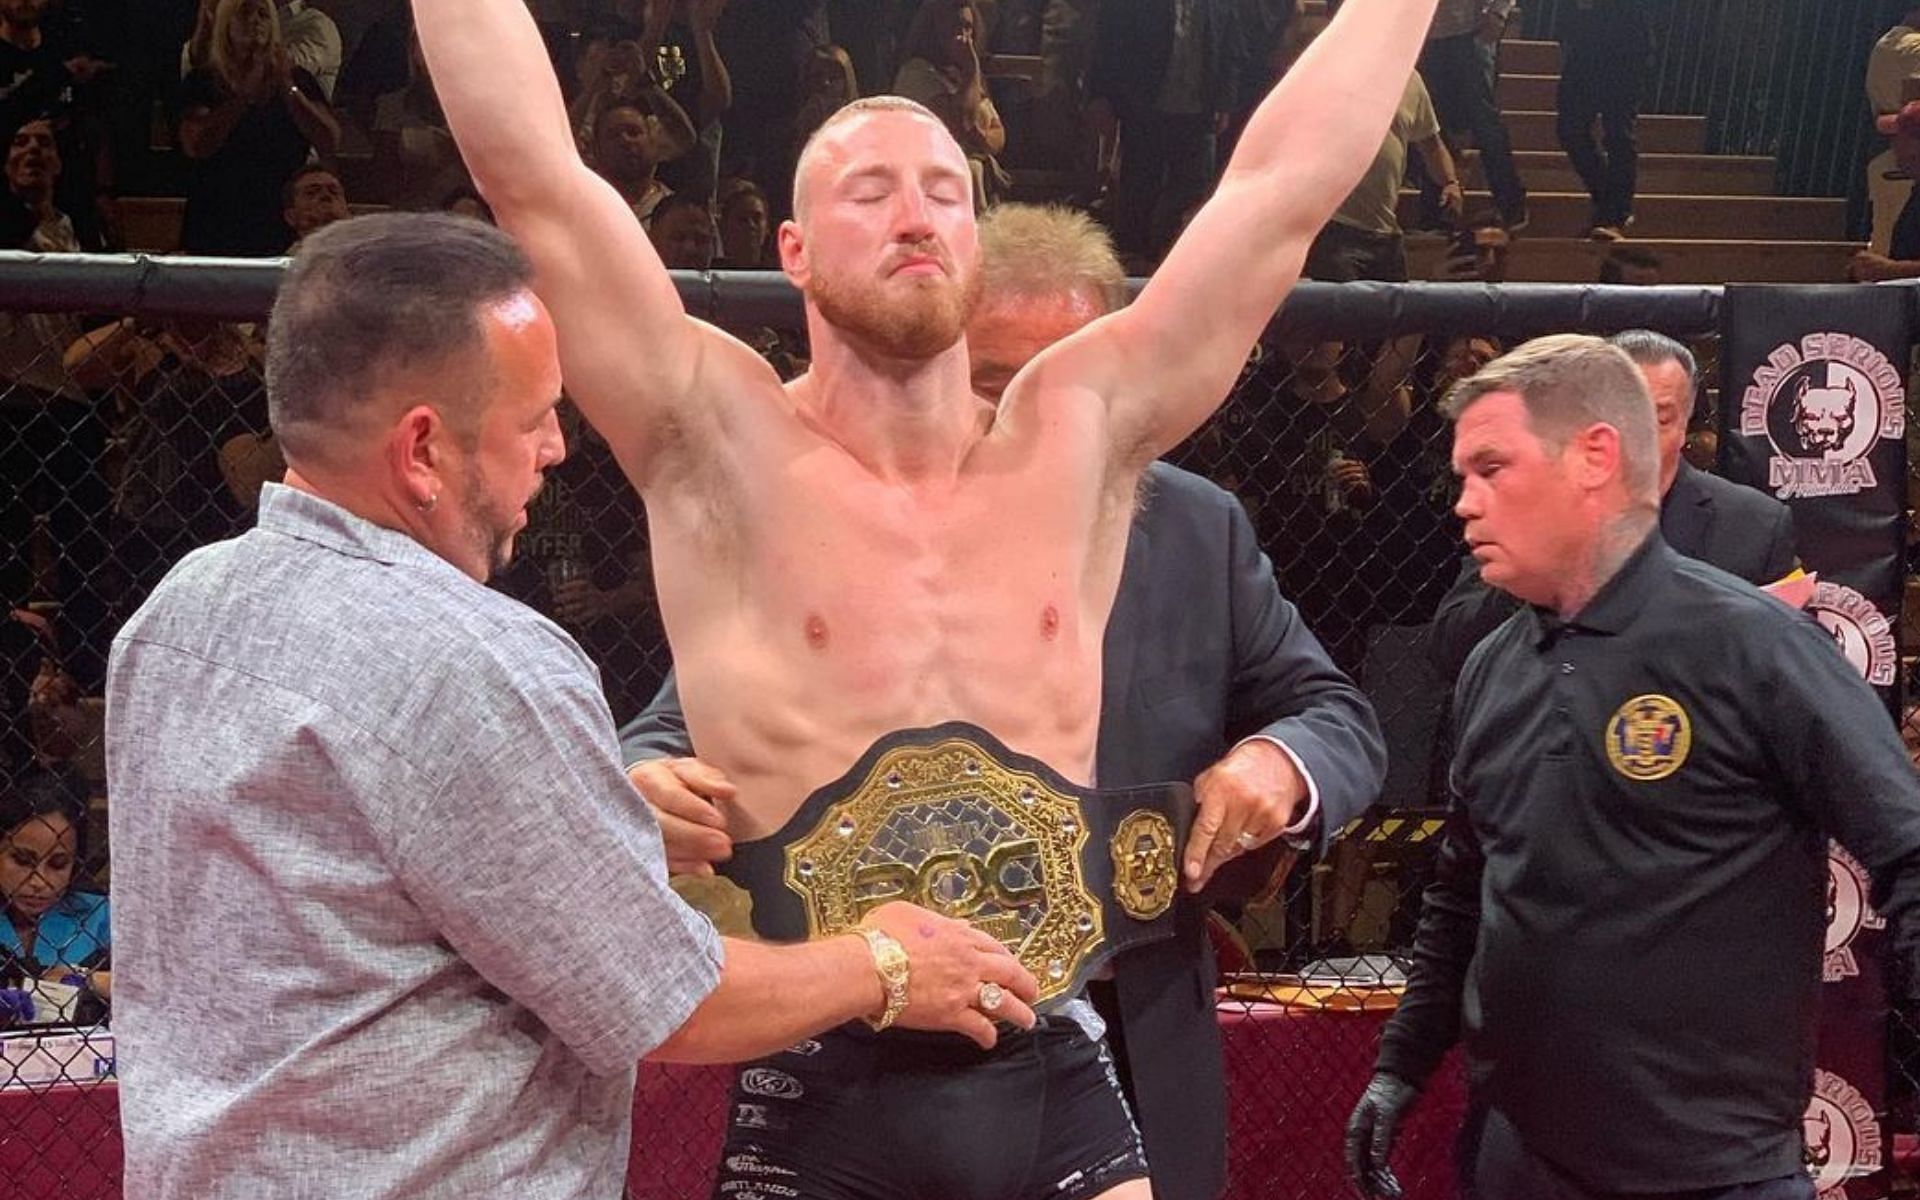 Joe Pyfer after being crowned the ROC middleweight champion (image courtesy @bodybagz_pyfer Instagram)